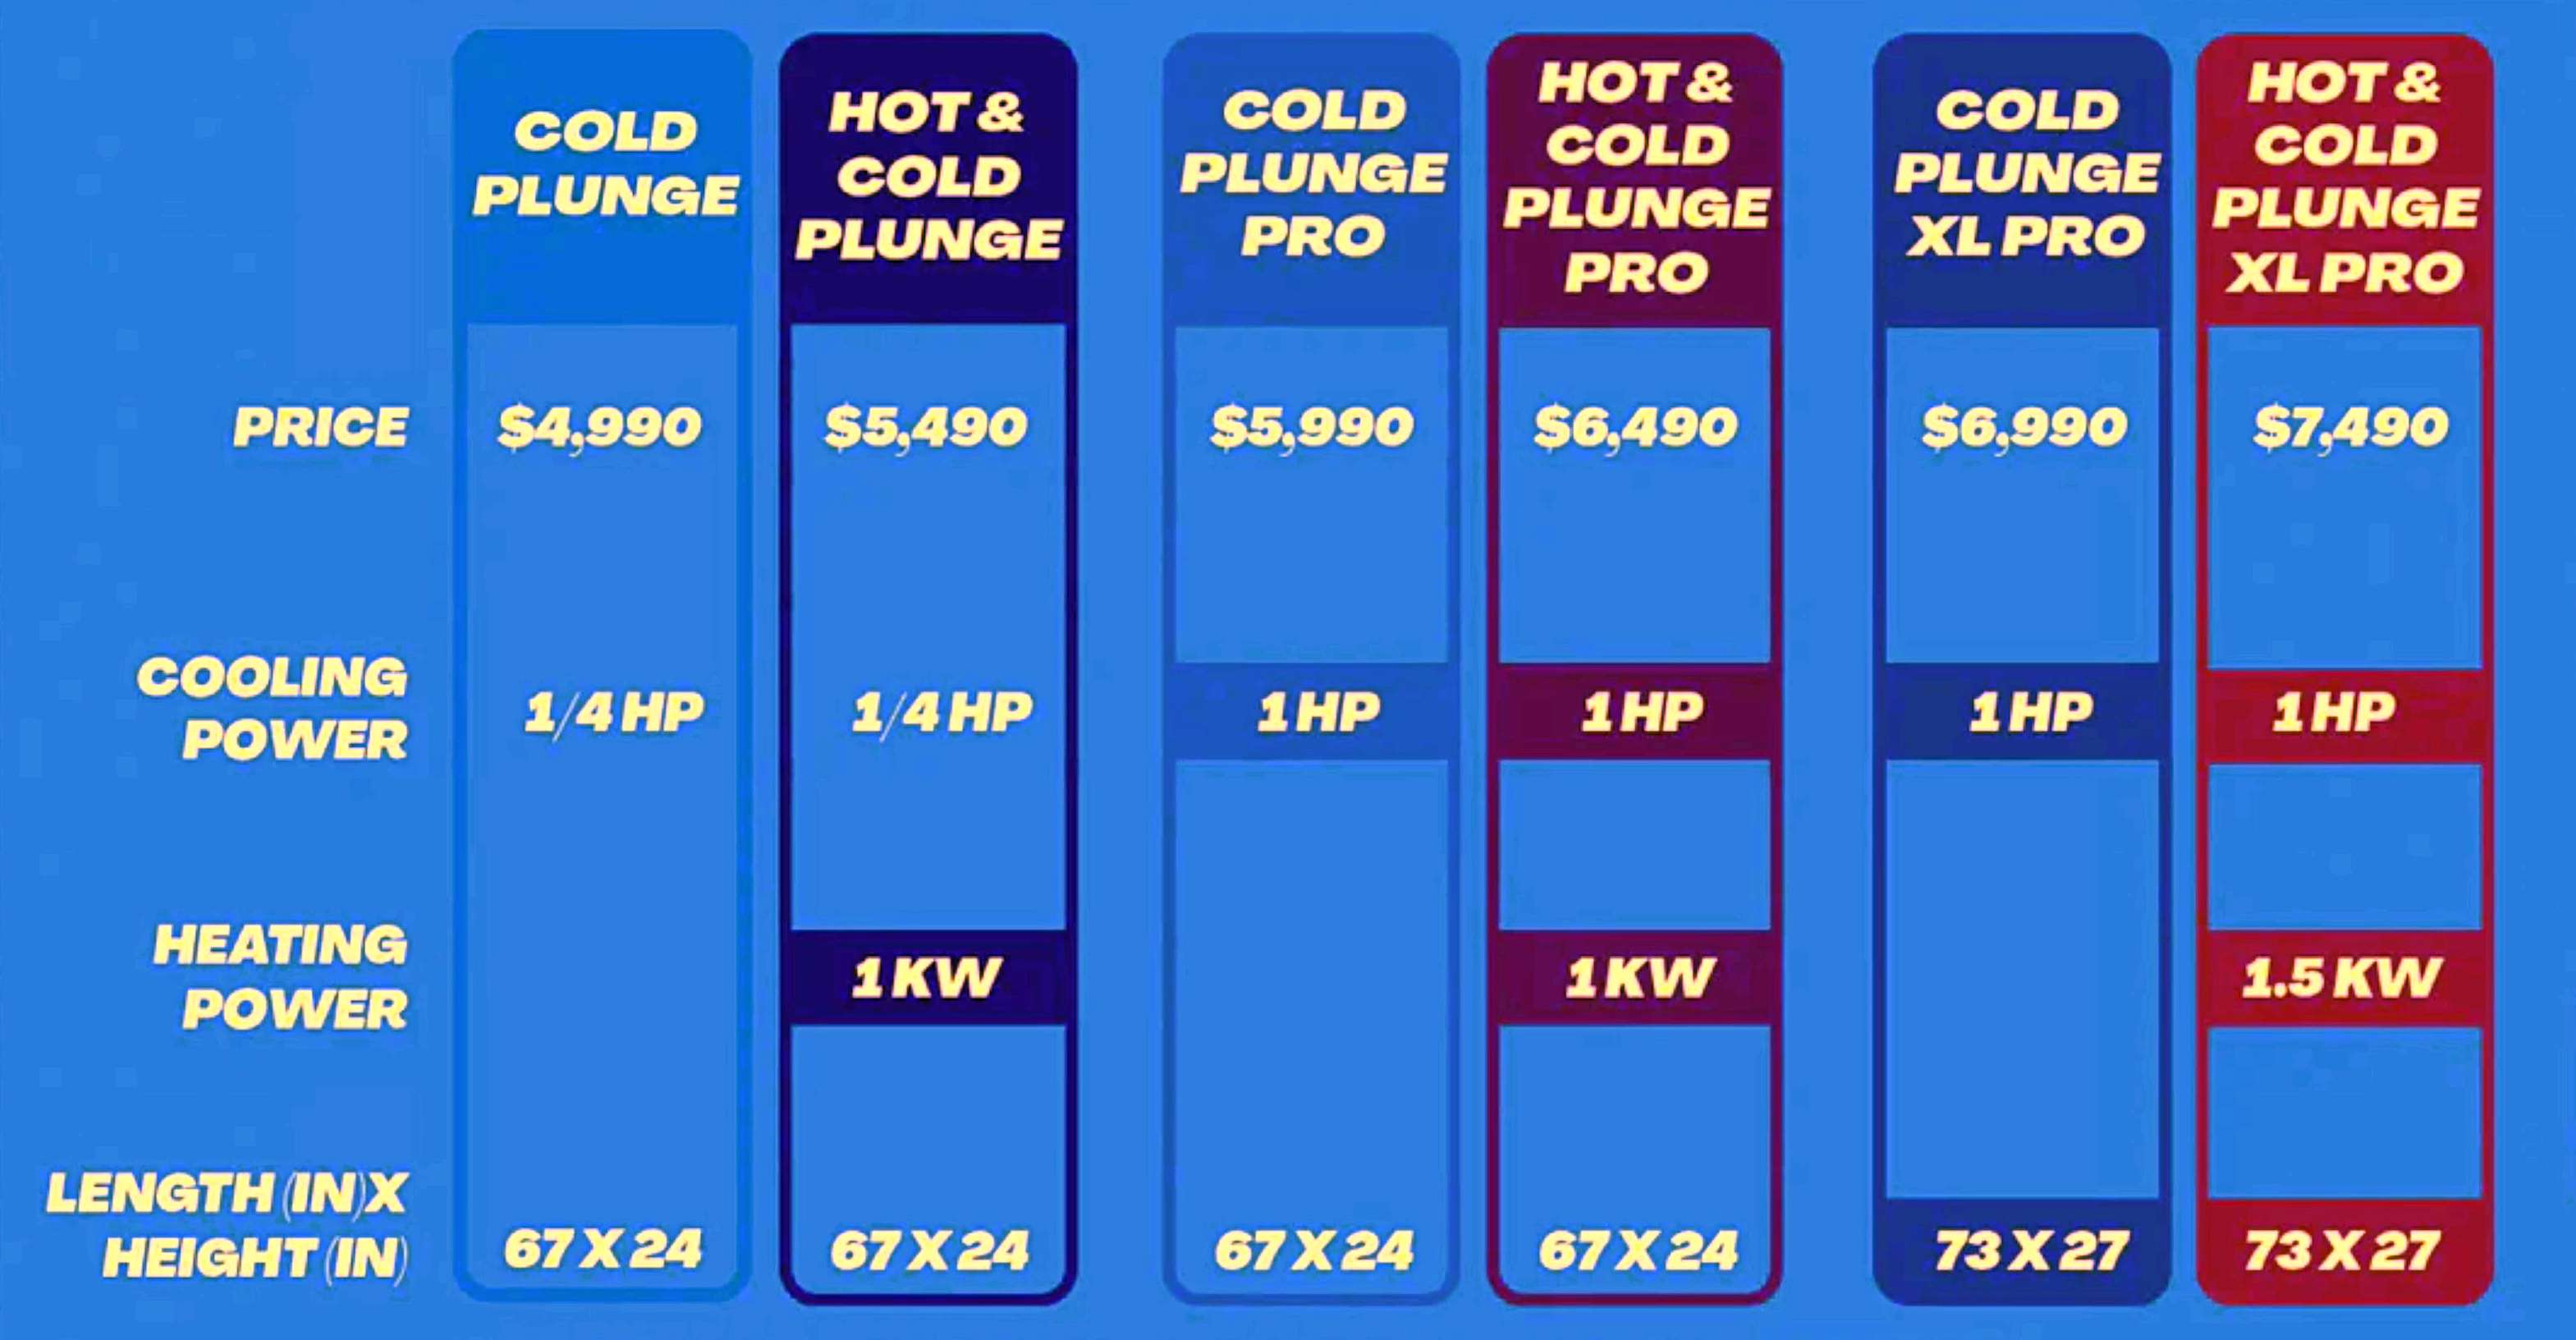 Cold Plunge options